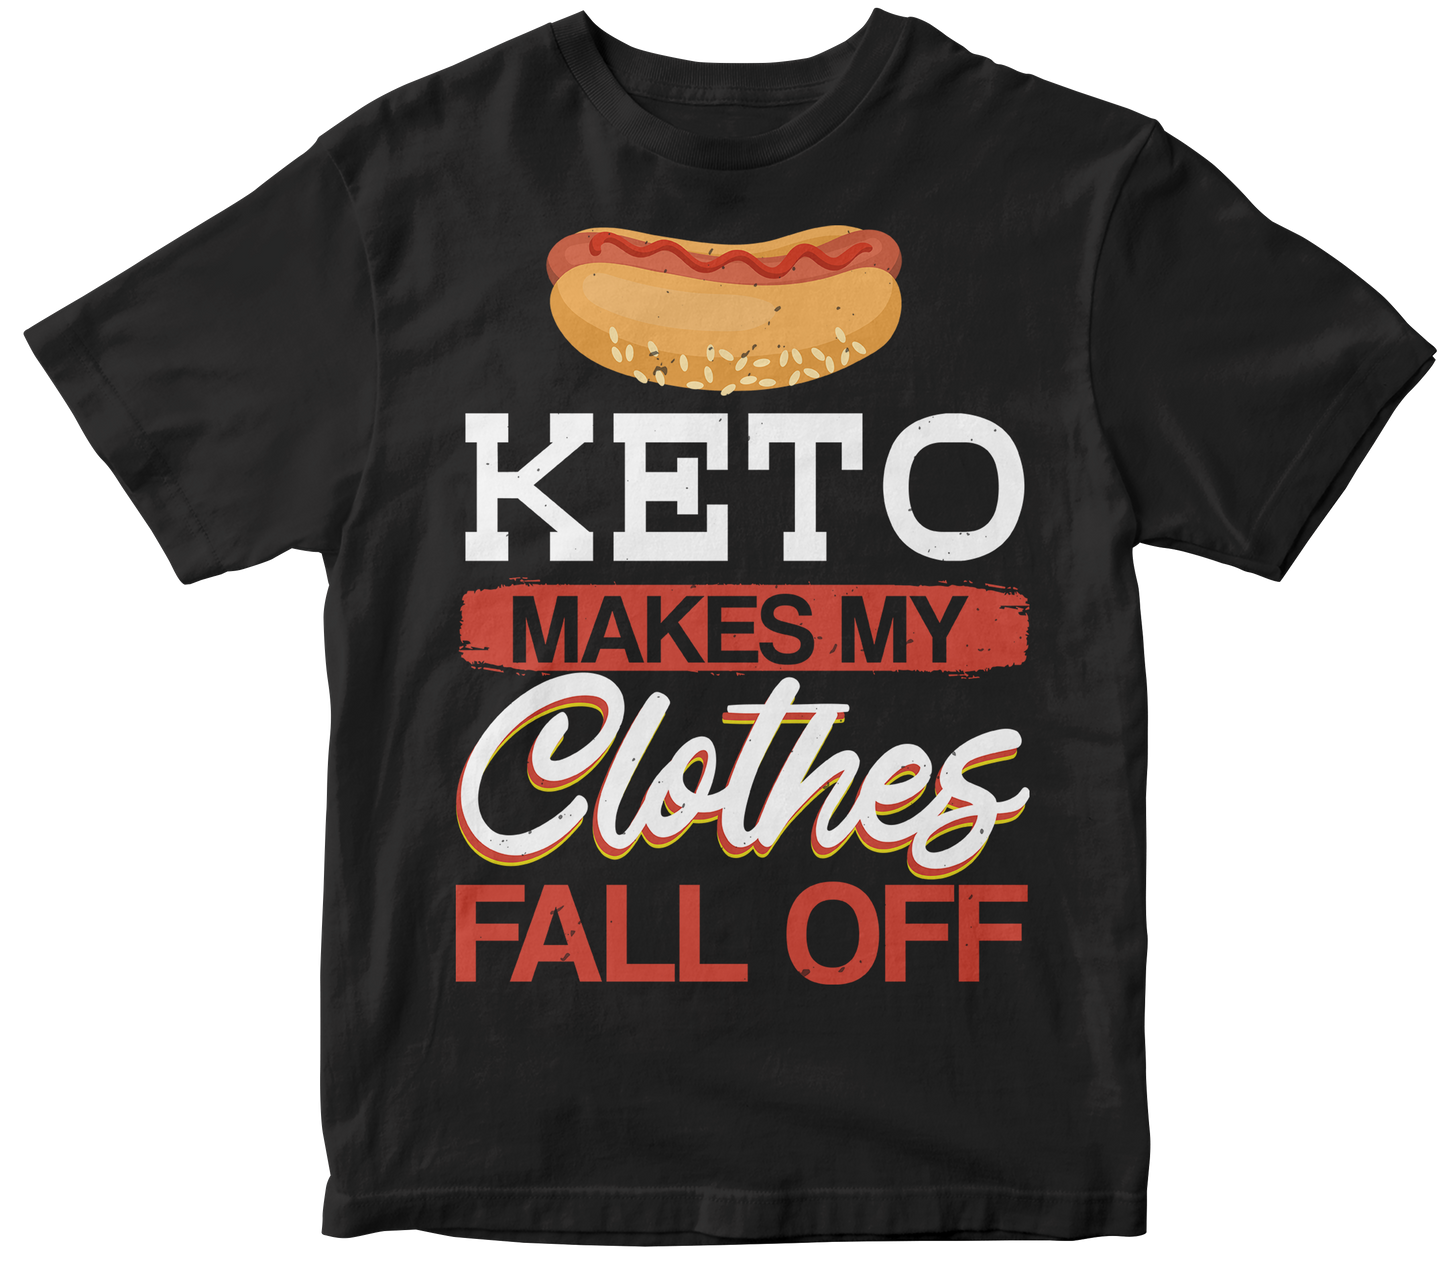 Keto Makes My Clothes Fall off